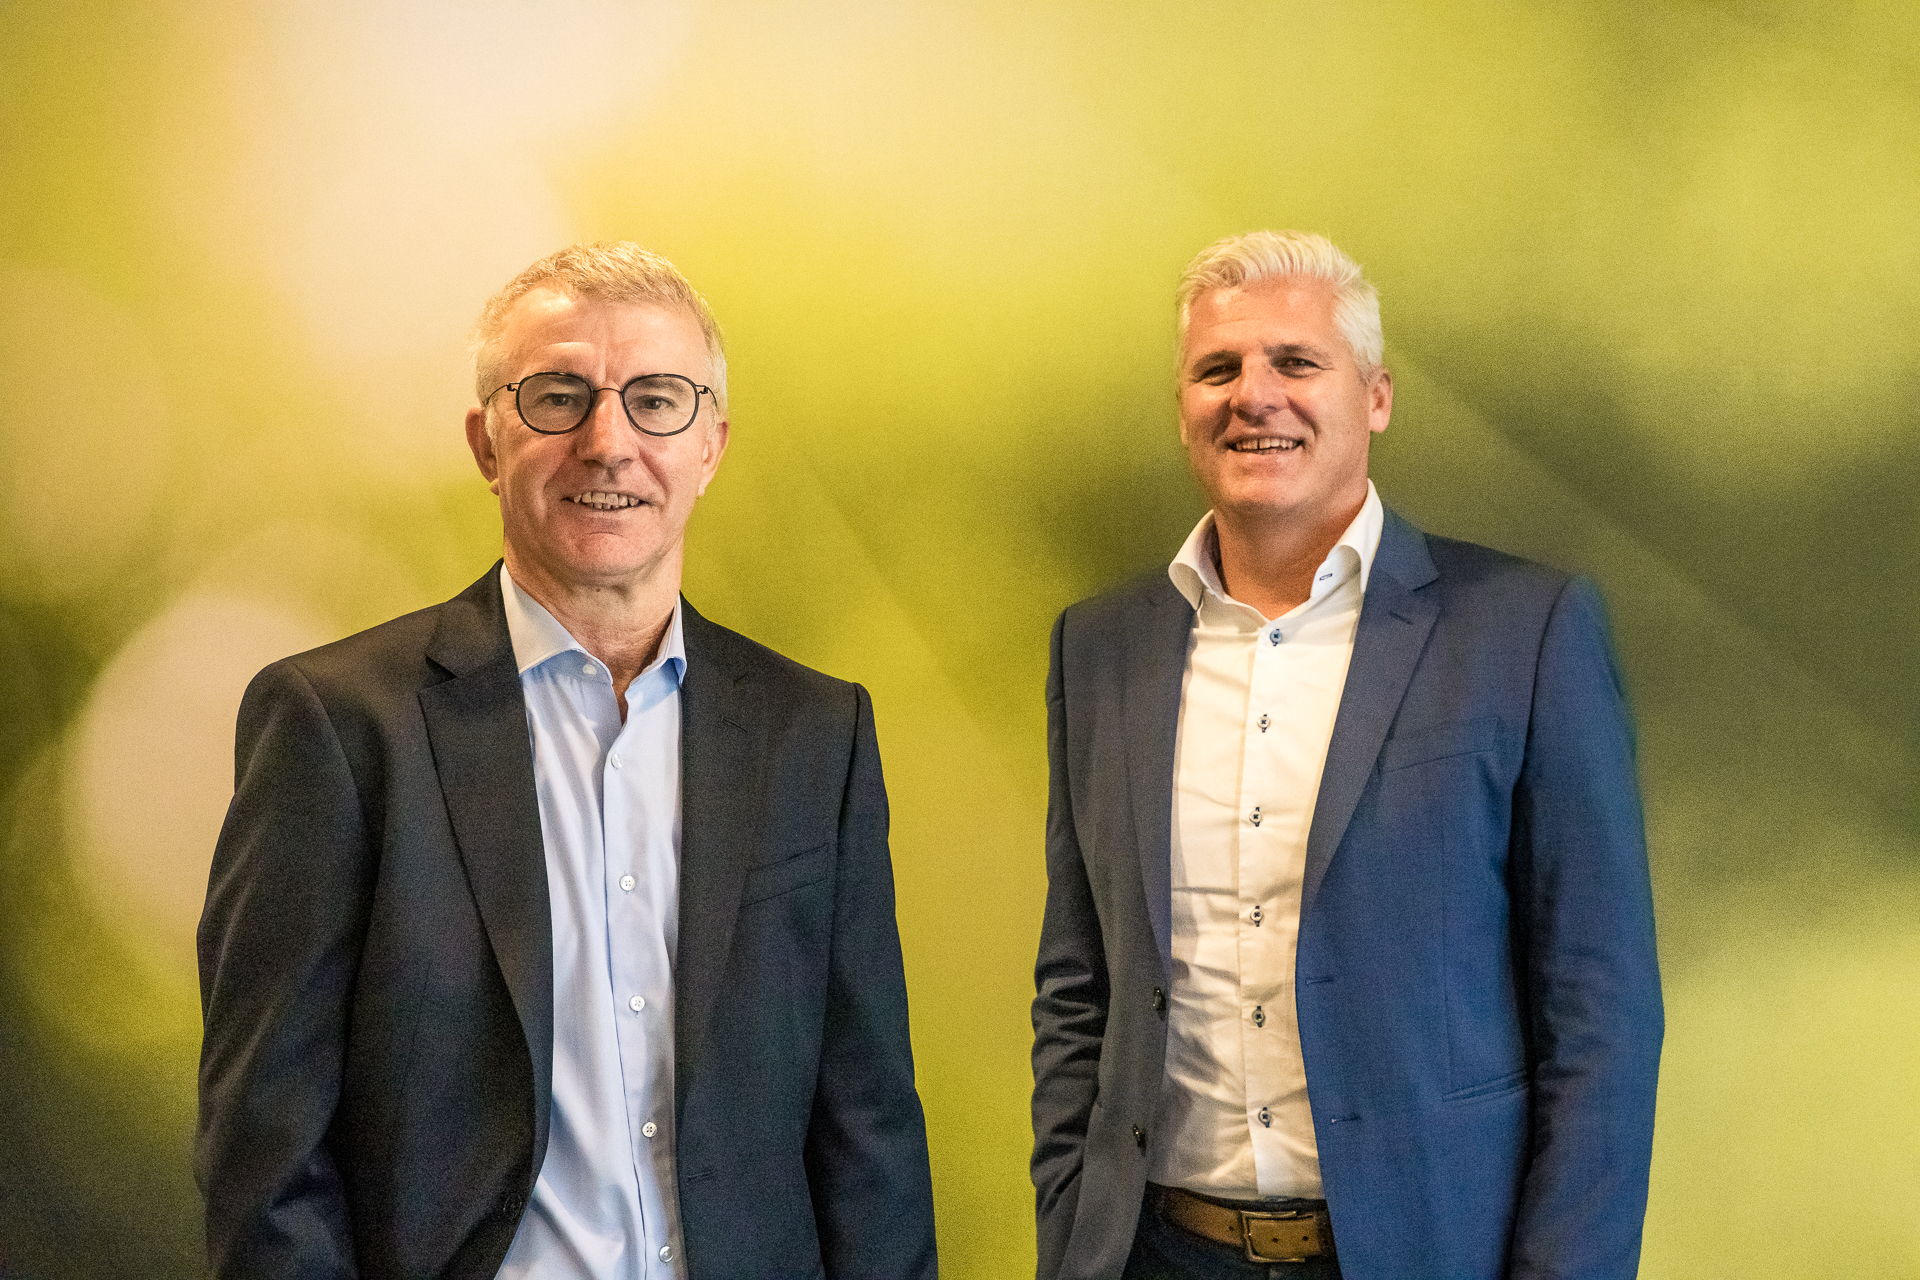 As of ​ 1 January 2024, Niek Depoorter (right) will take over the role of current CEO, Eric Lauwers (left).